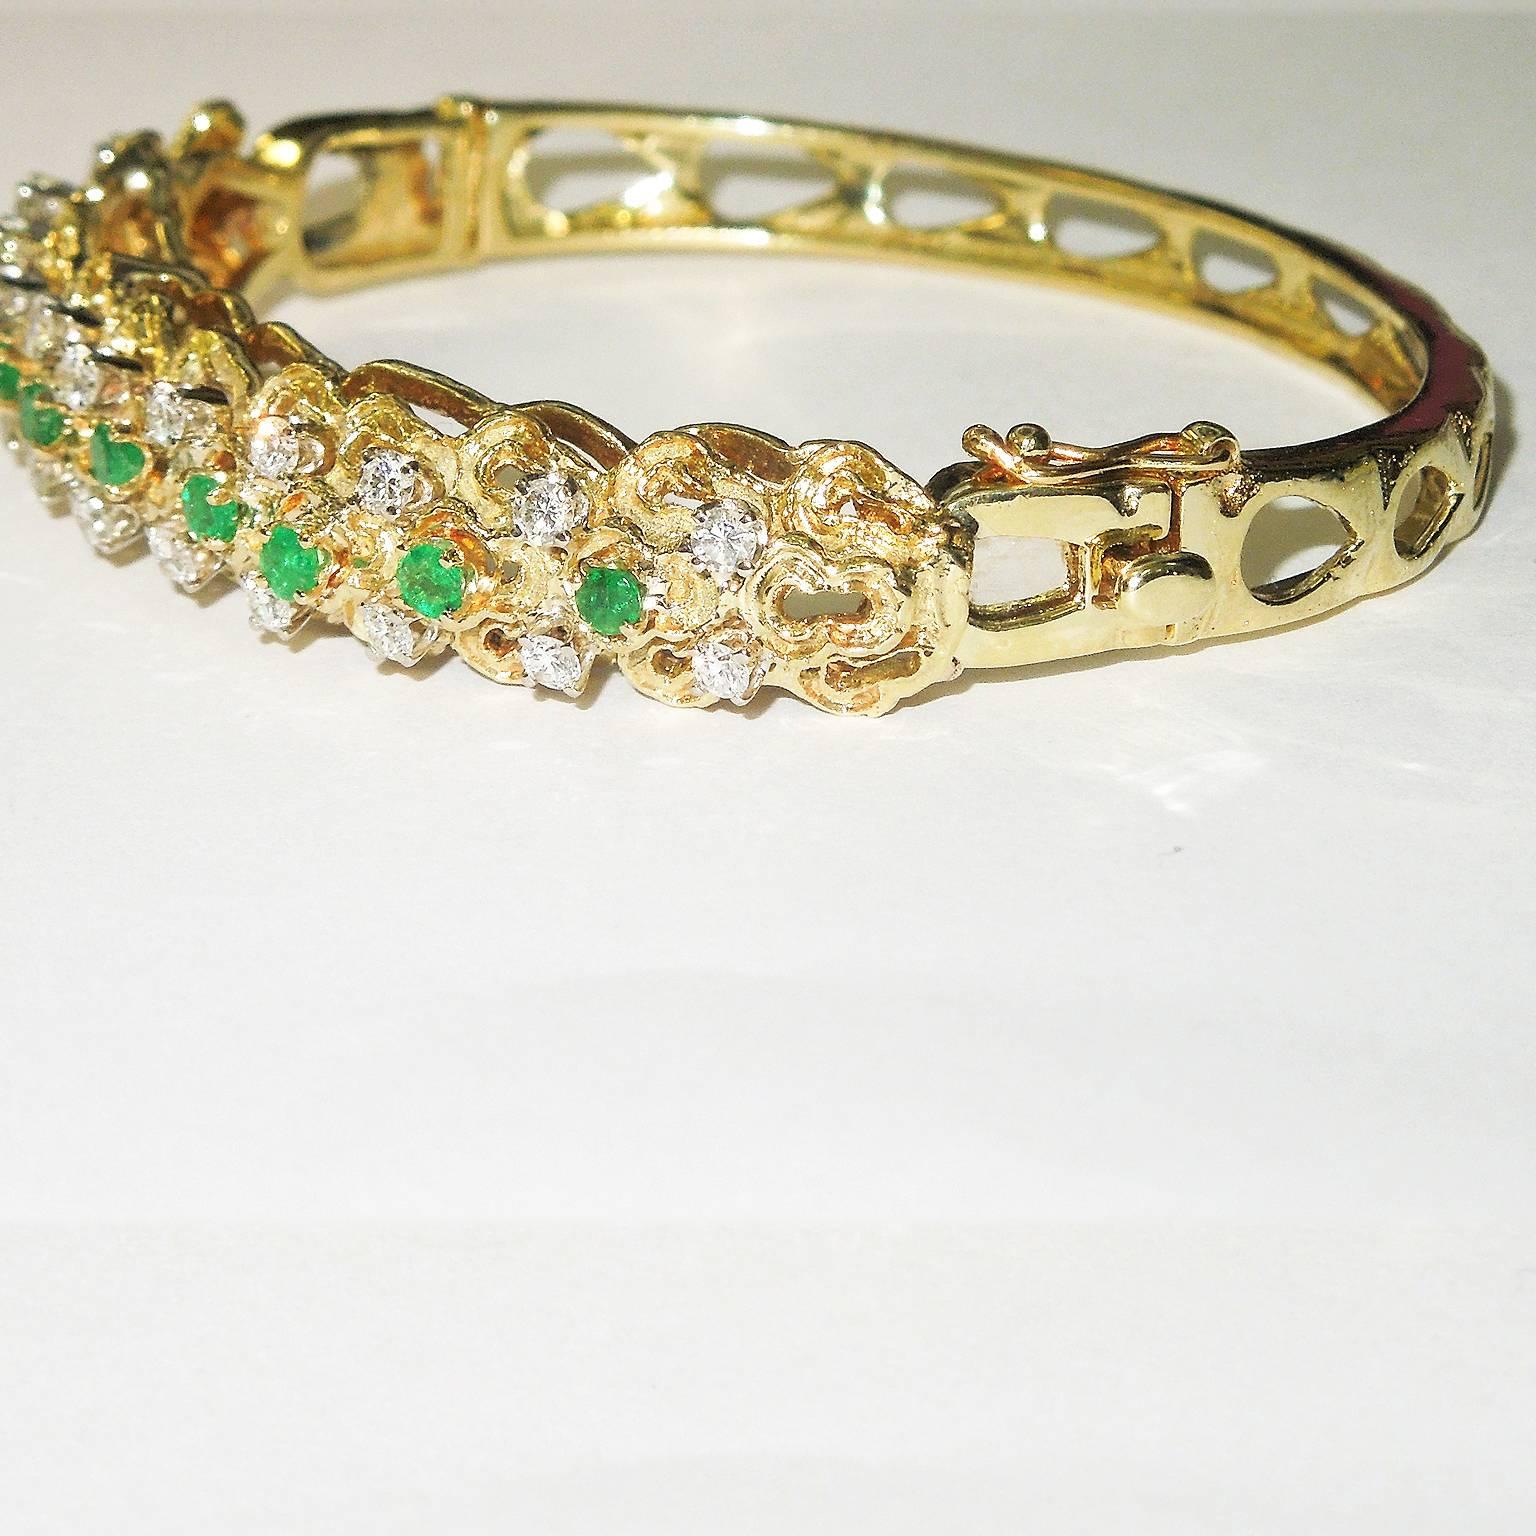 18K Gold Bracelet with Emeralds and Diamonds

apprx. 1.00ct. Zambian Emeralds

1.10ct. Diamonds

28.3g solid 18k Gold 

Size 8

Push Button Clasp with Safety

0.4 inch width

Estate
